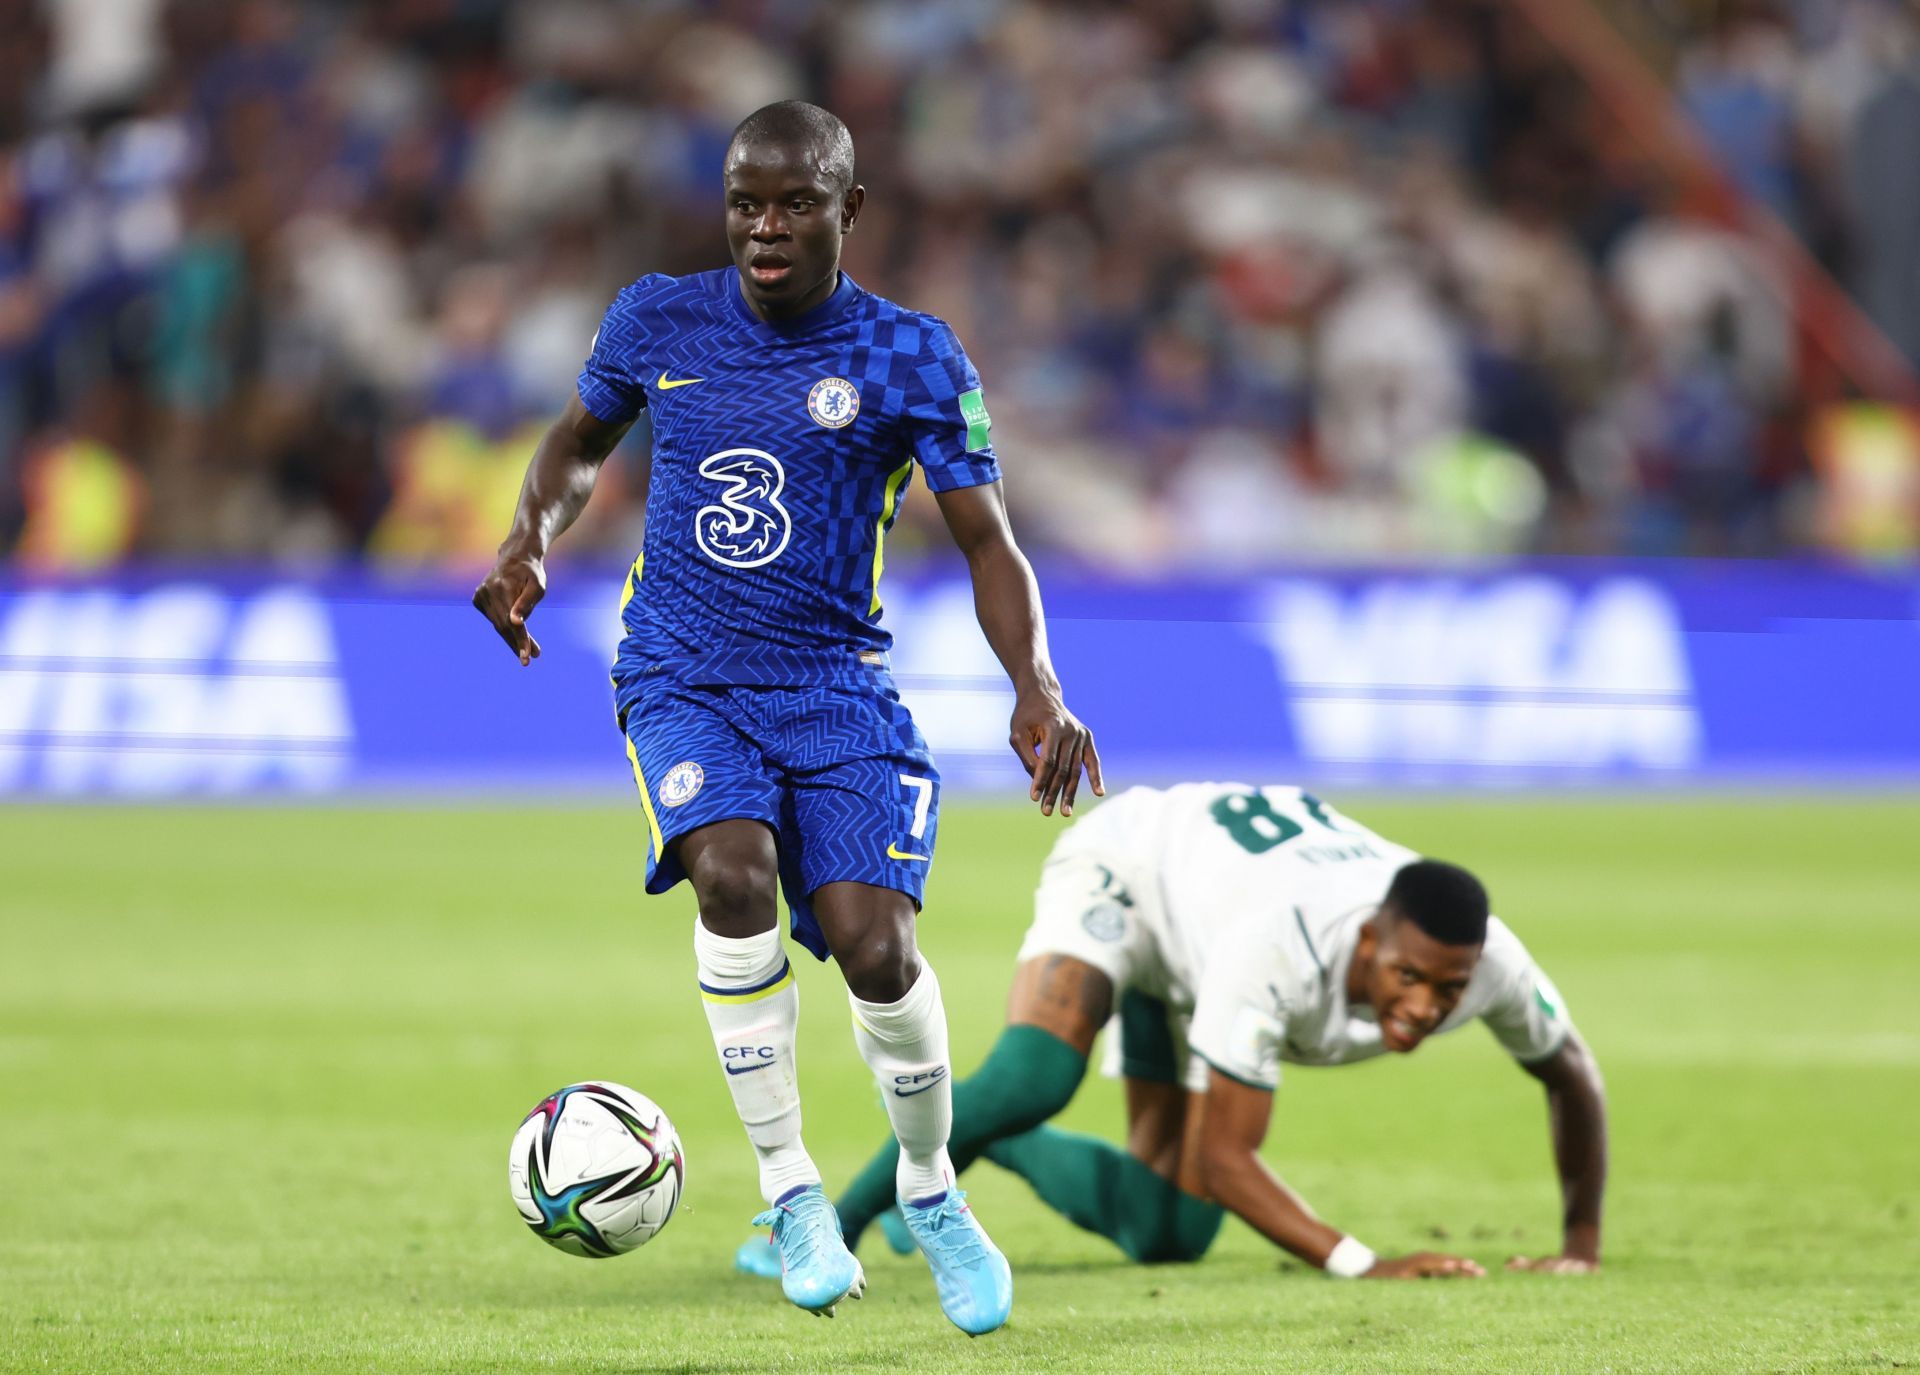 Kante won four consecutive man of the match awards in the Champions League last season